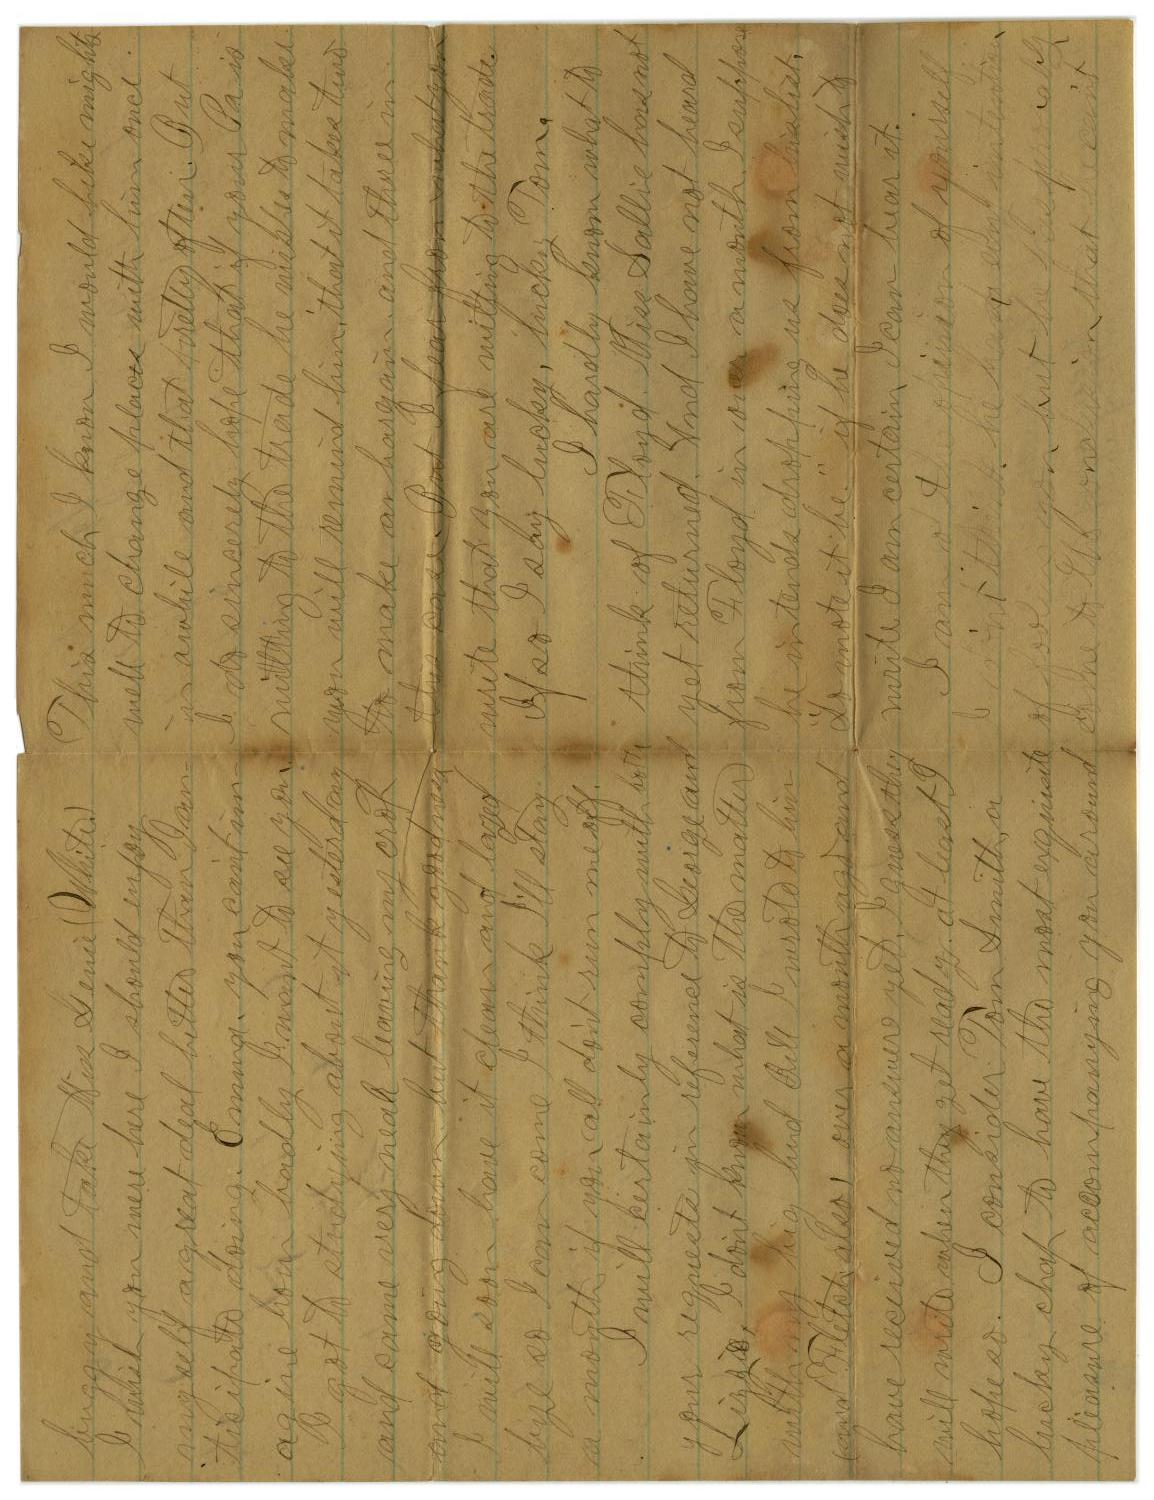 [Letter from John C. Brewer to Emma Davis, June 4, 1879]
                                                
                                                    [Sequence #]: 2 of 6
                                                